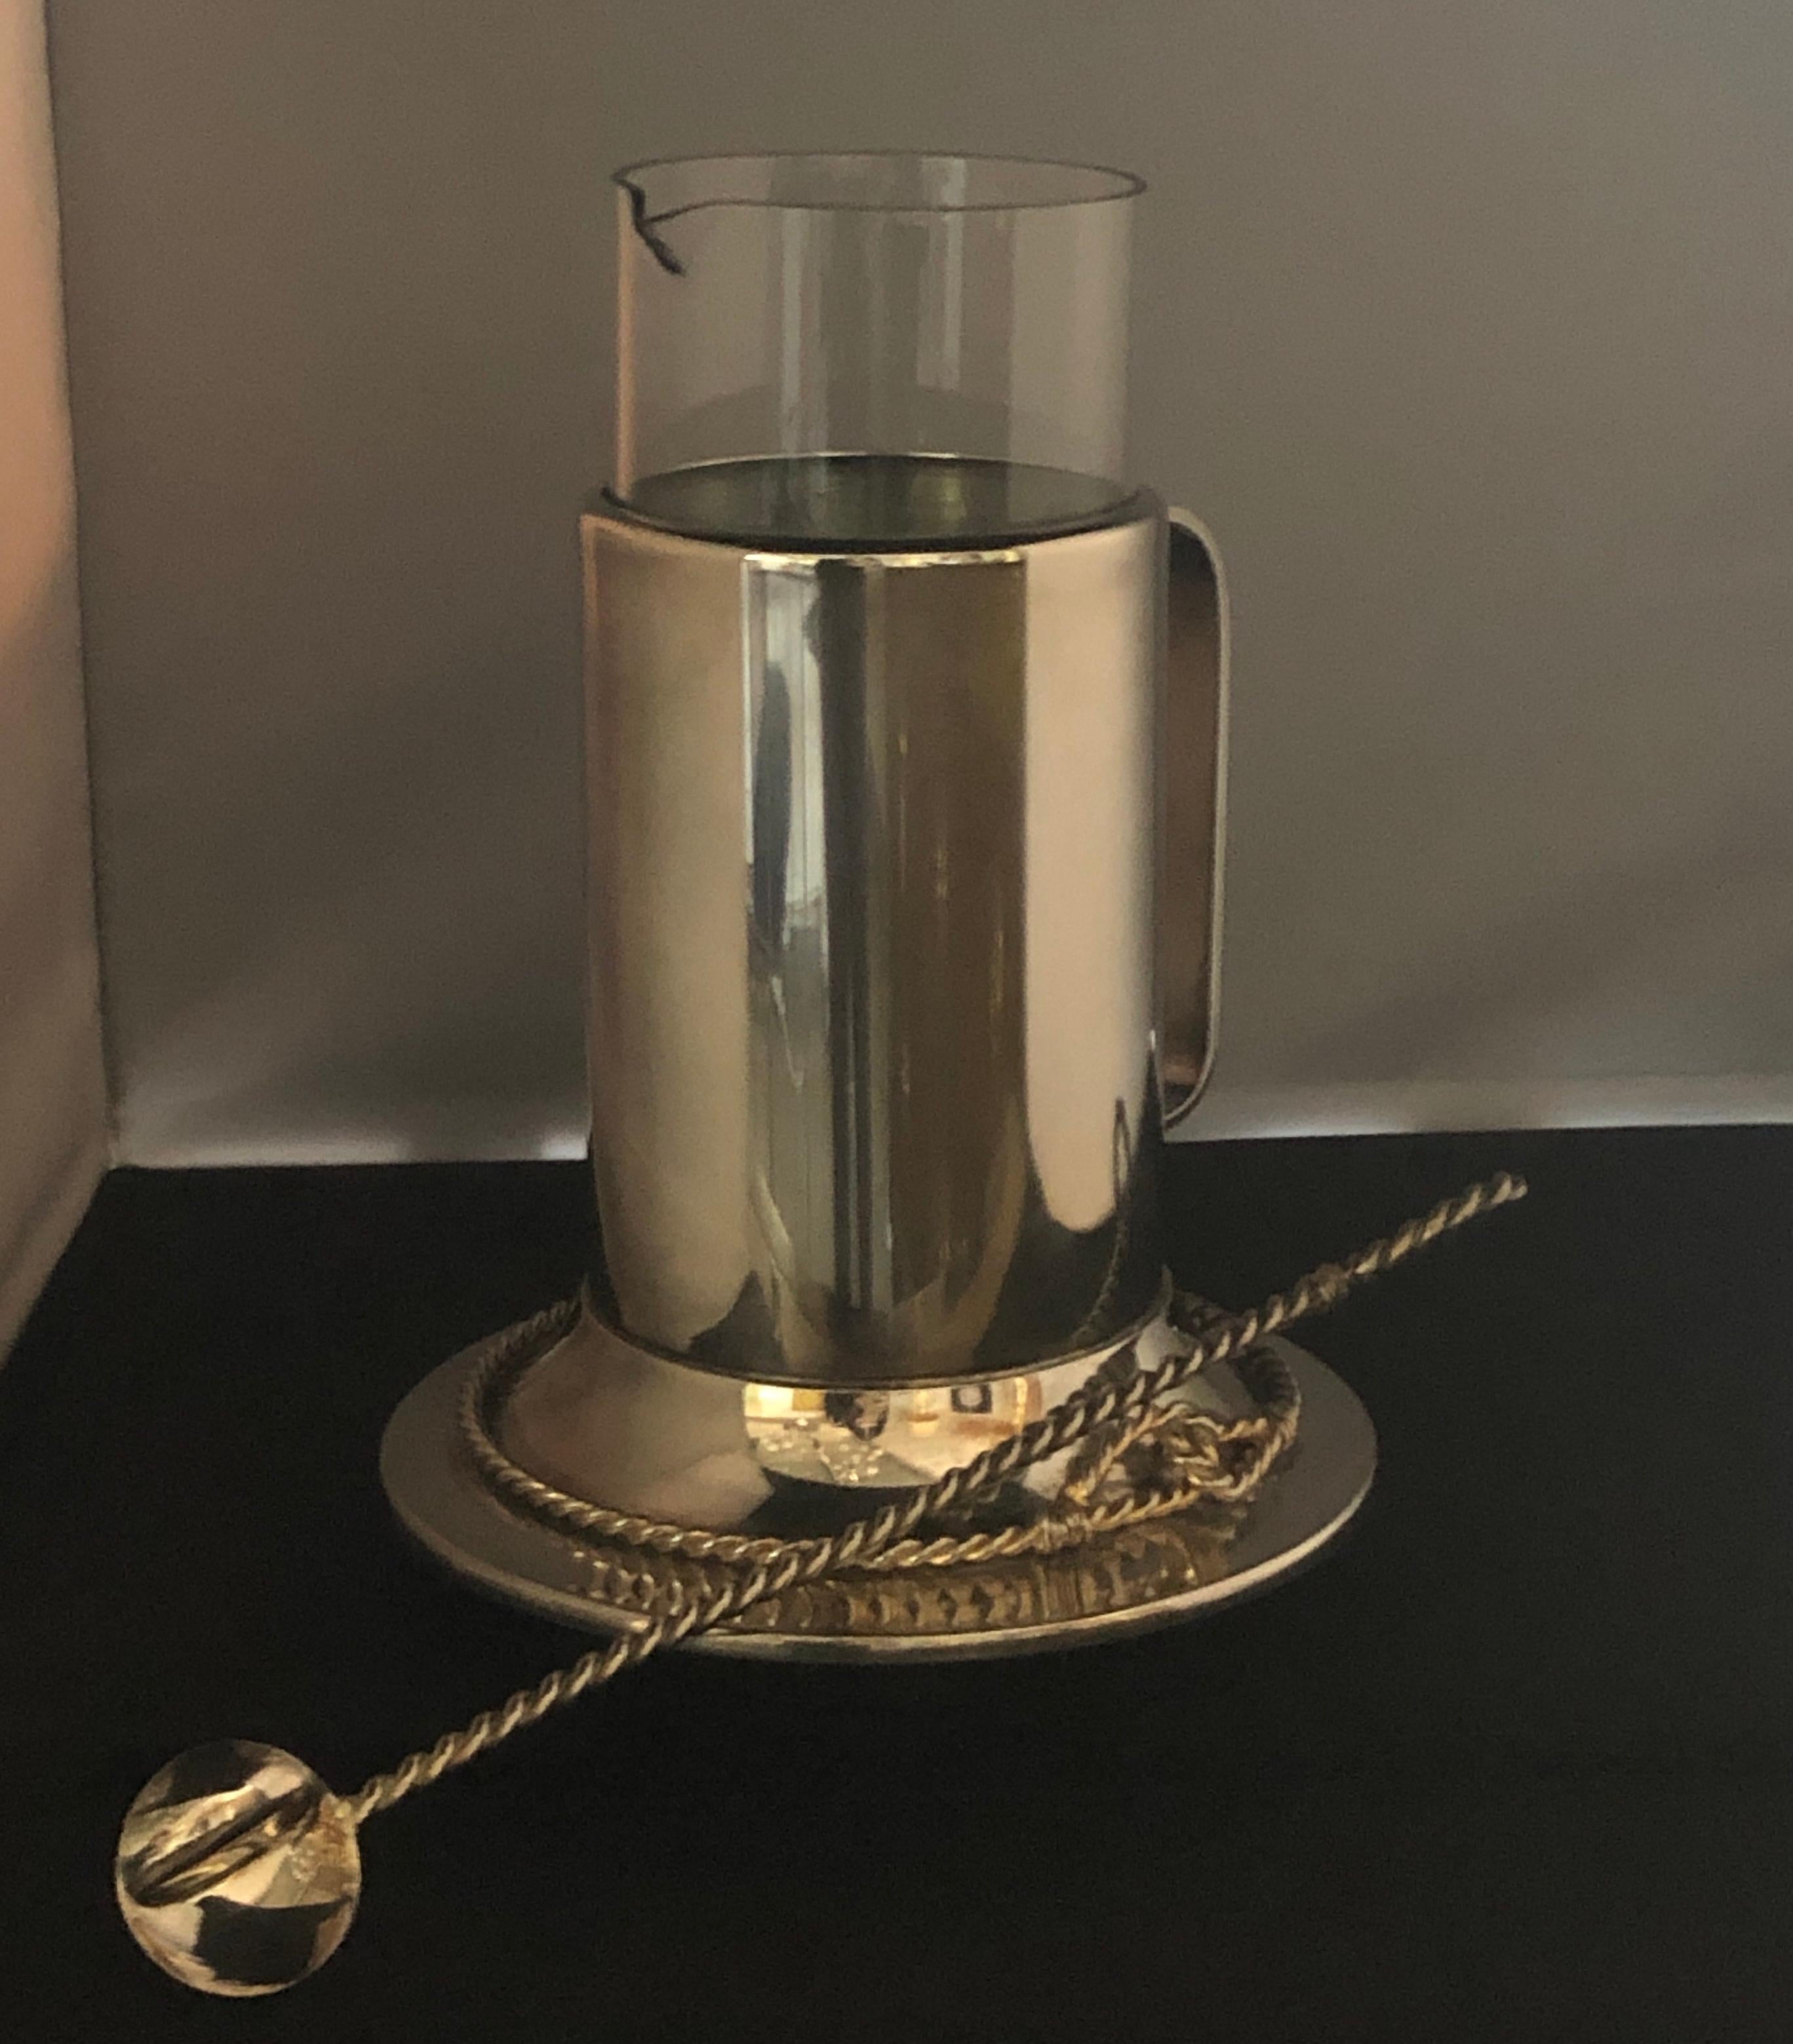 Offered is a Mid-Century Modern or late 20th century nautical themed glass encased in silver and gold plate vintage signed Gucci martini pitcher with matching French twist also in gold and silver long spoon. The glass pitcher can be removed and